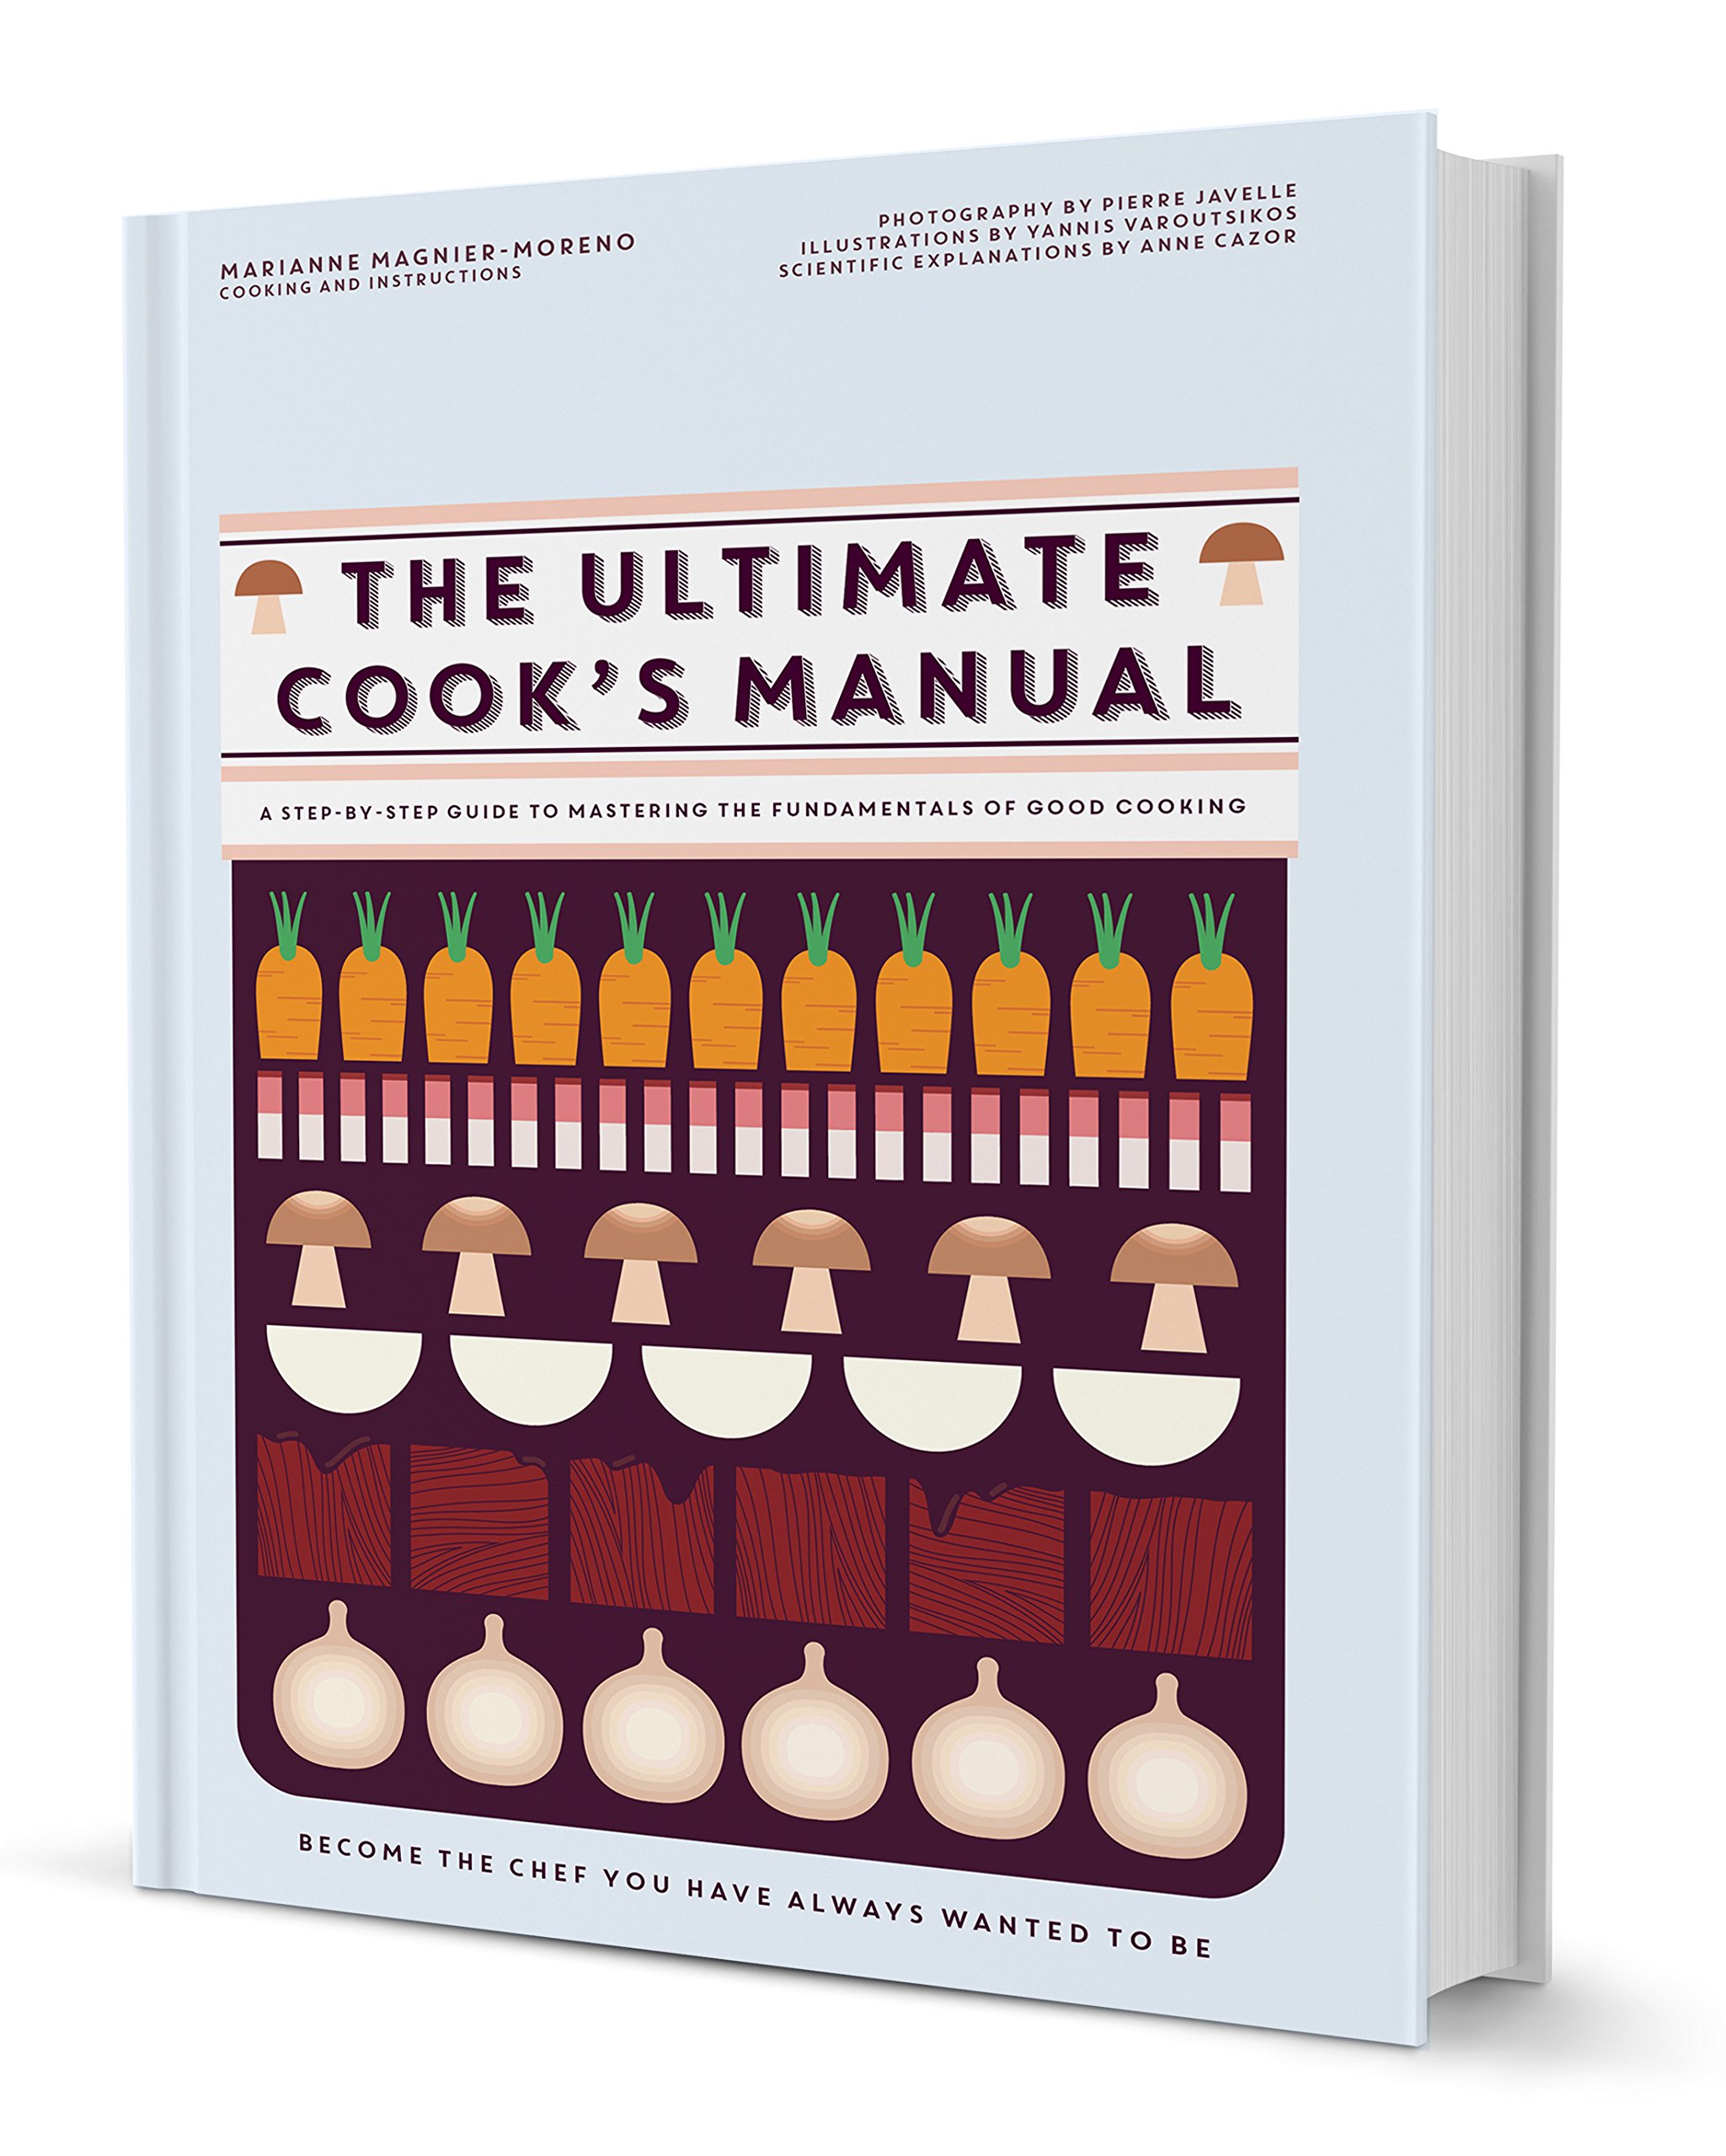 The Ultimate Cook\'s Manual | Marianne Magnier-Moreno